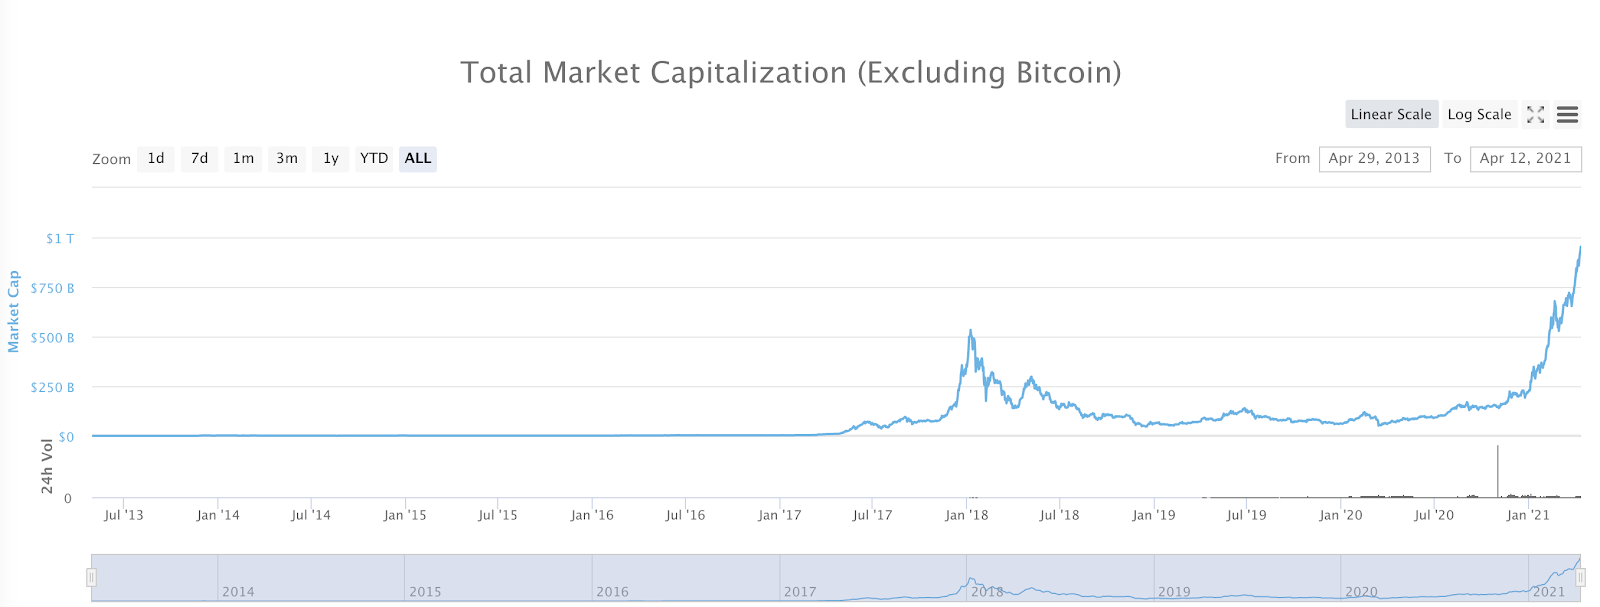 Cryptocurrency Market Is Zeroing In On Apple Valuation Above 2t Apple Aapl Benzinga